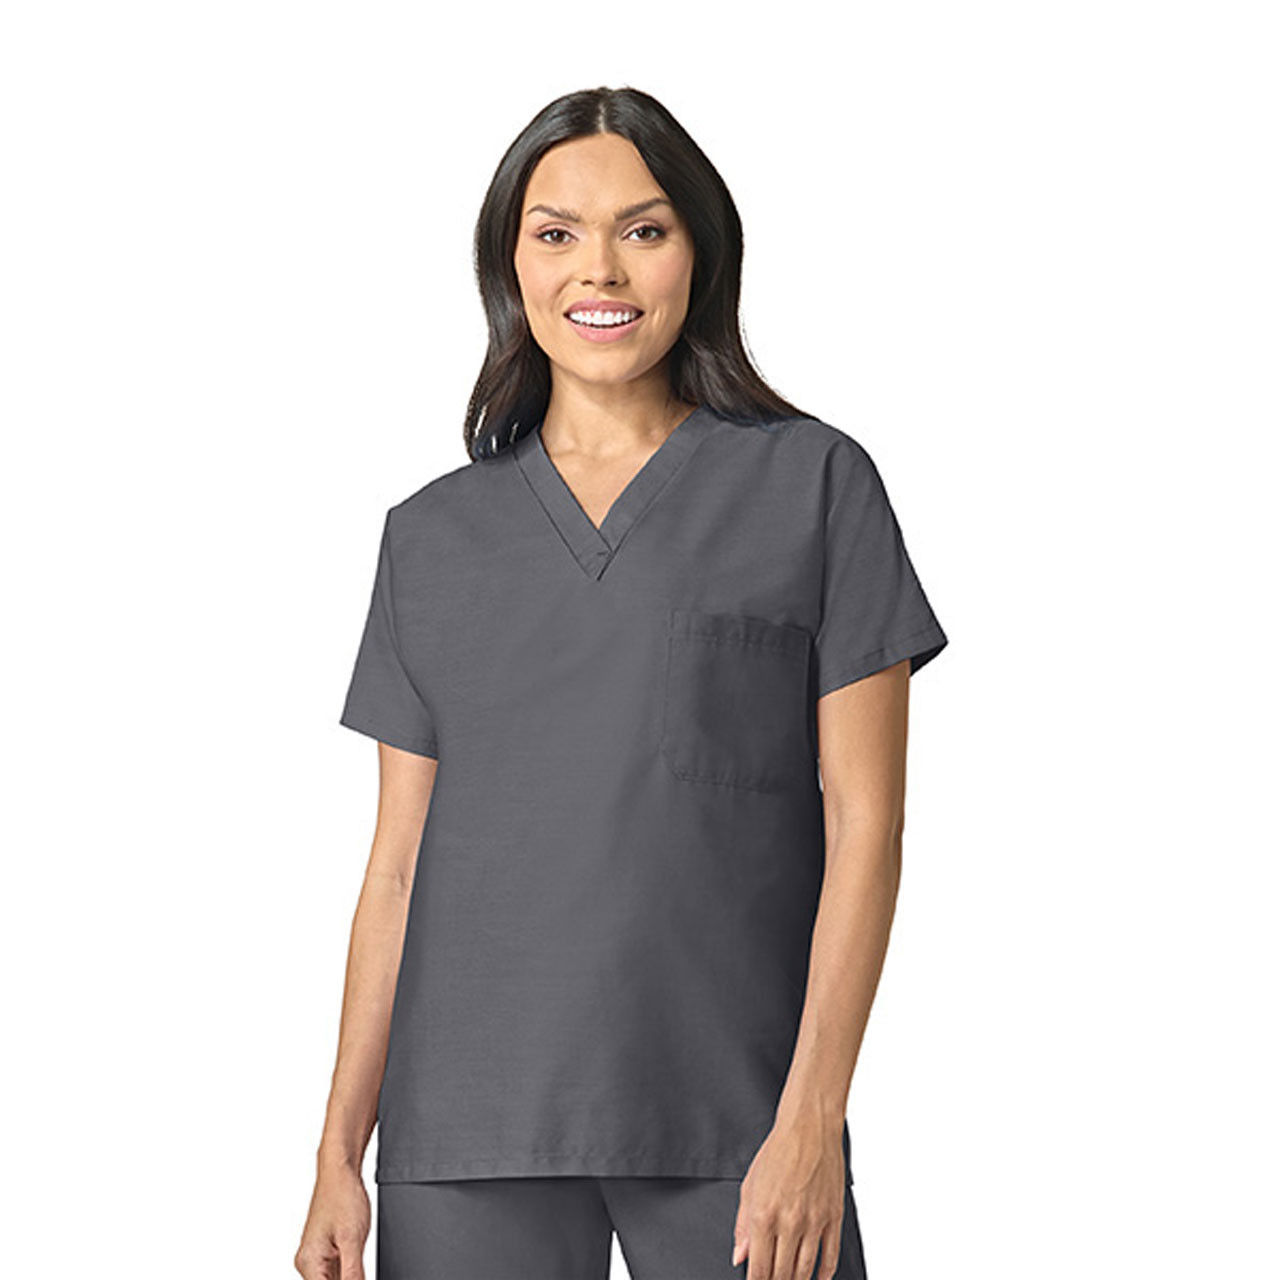 What gender is the Pewter Gray Scrub Top designed for?